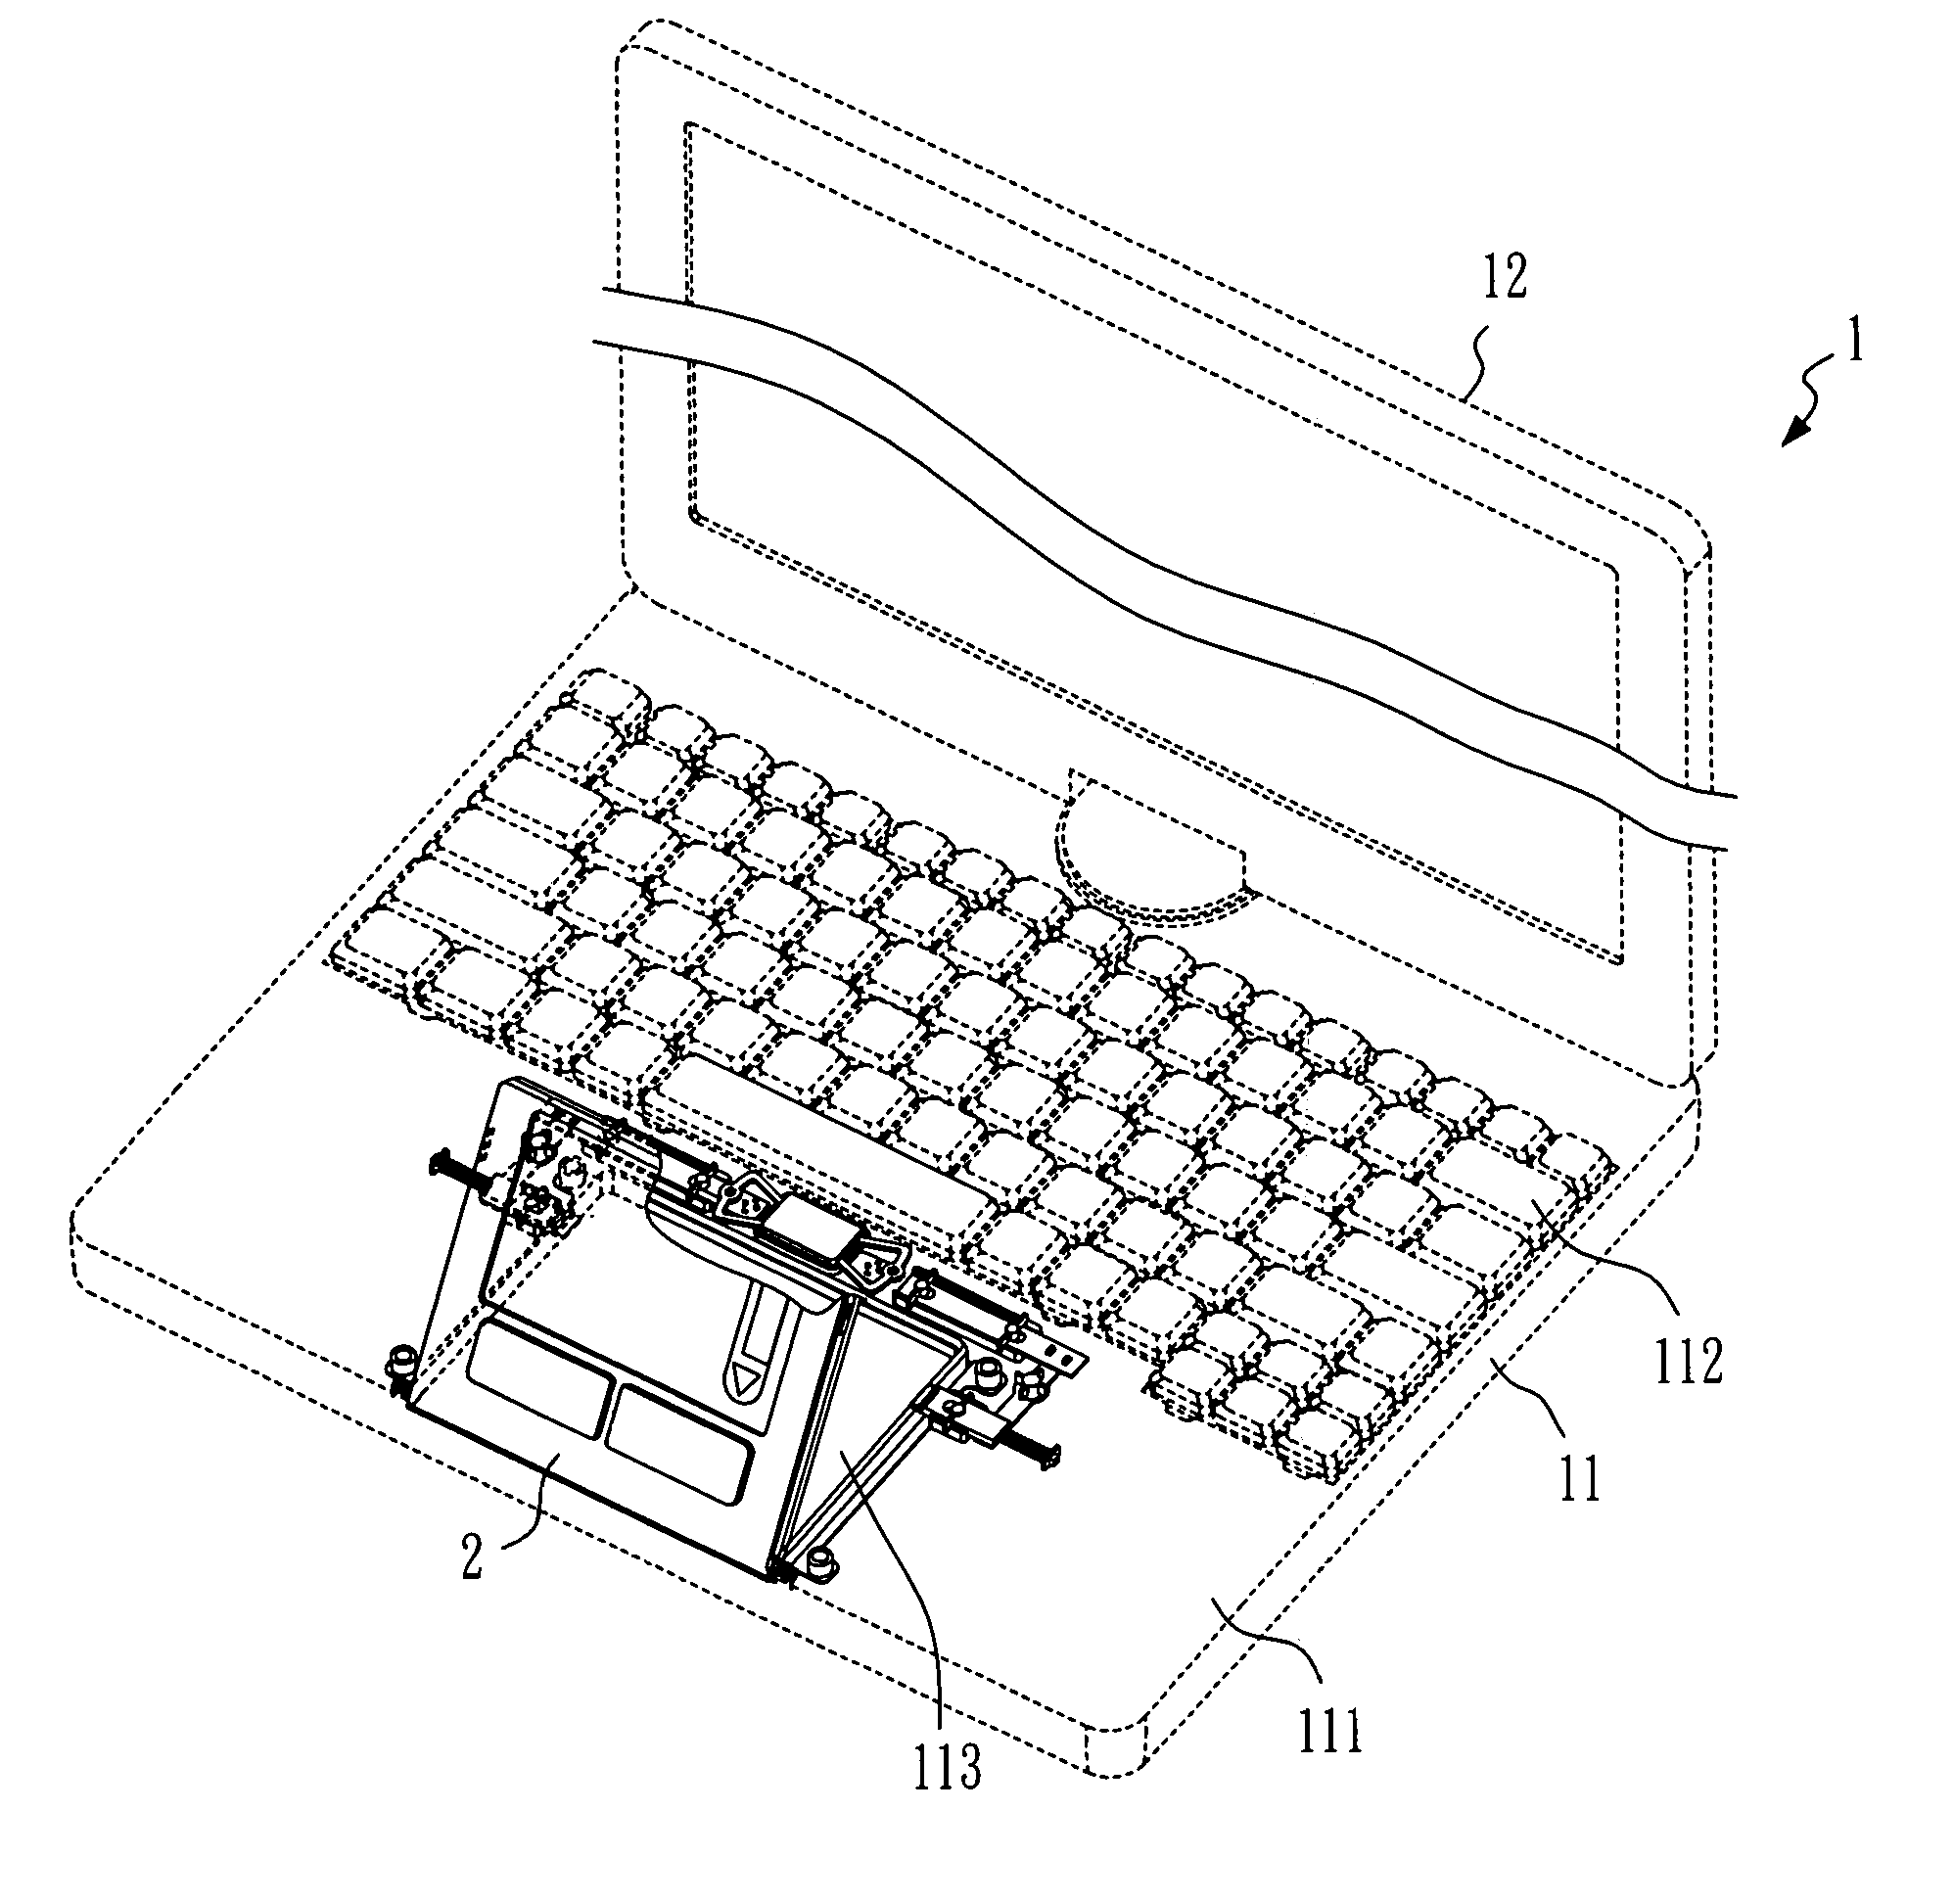 Swivel display inclining structure